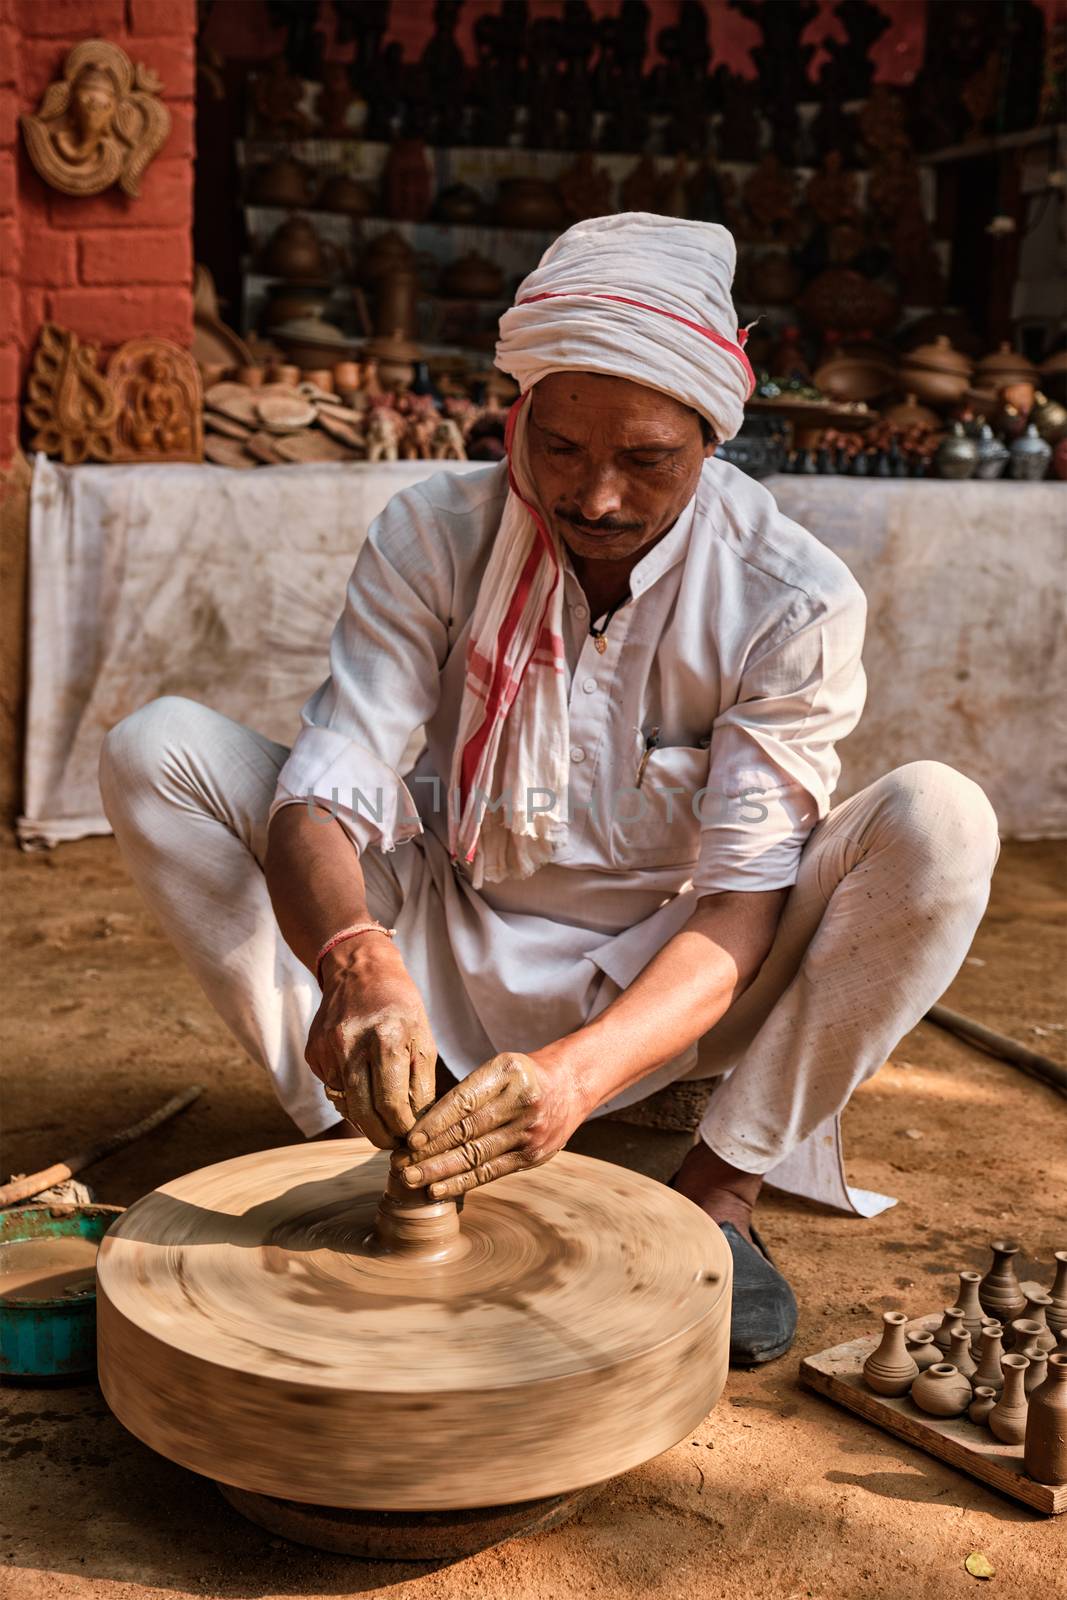 Indian potter at work: throwing the potter's wheel and shaping ceramic vessel and clay ware: pot, jar in pottery workshop. Experienced master. Handwork craft from Shilpagram, Udaipur, Rajasthan, India